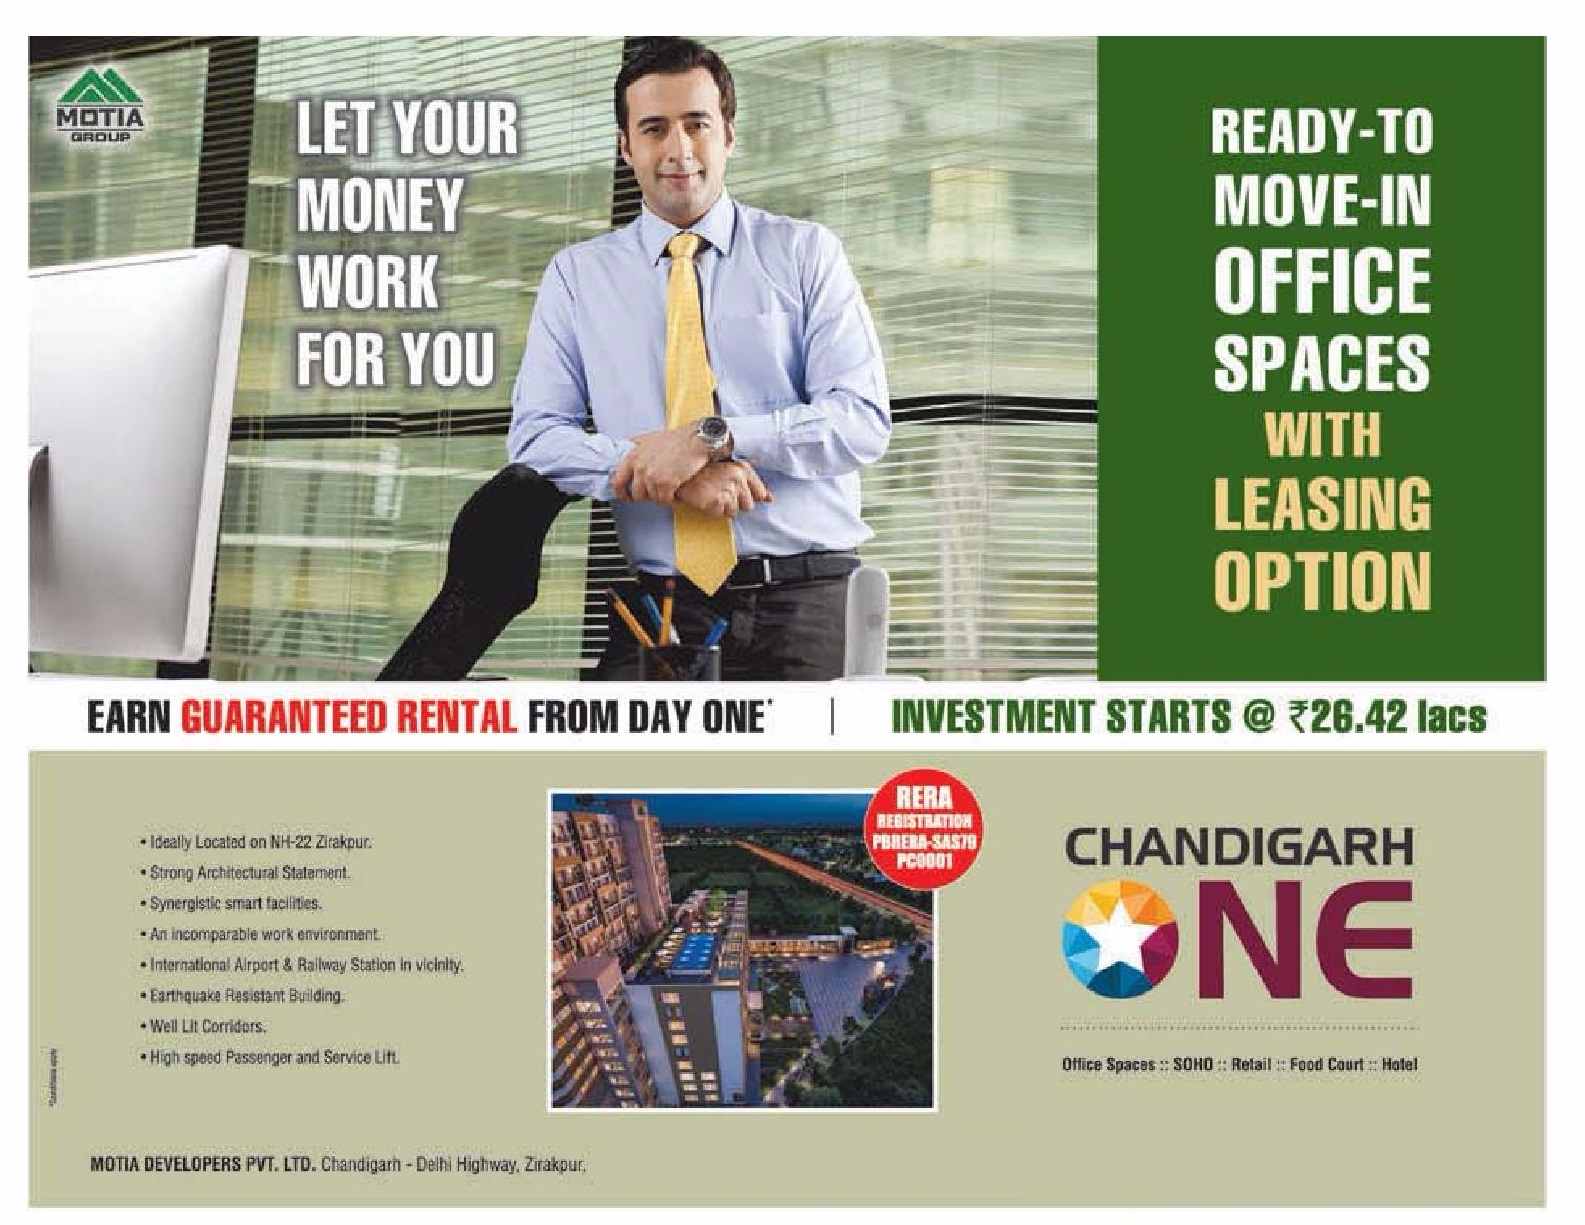 Ready to move office space with leasing option at Motia Chandigarh One in Chandigarh Update